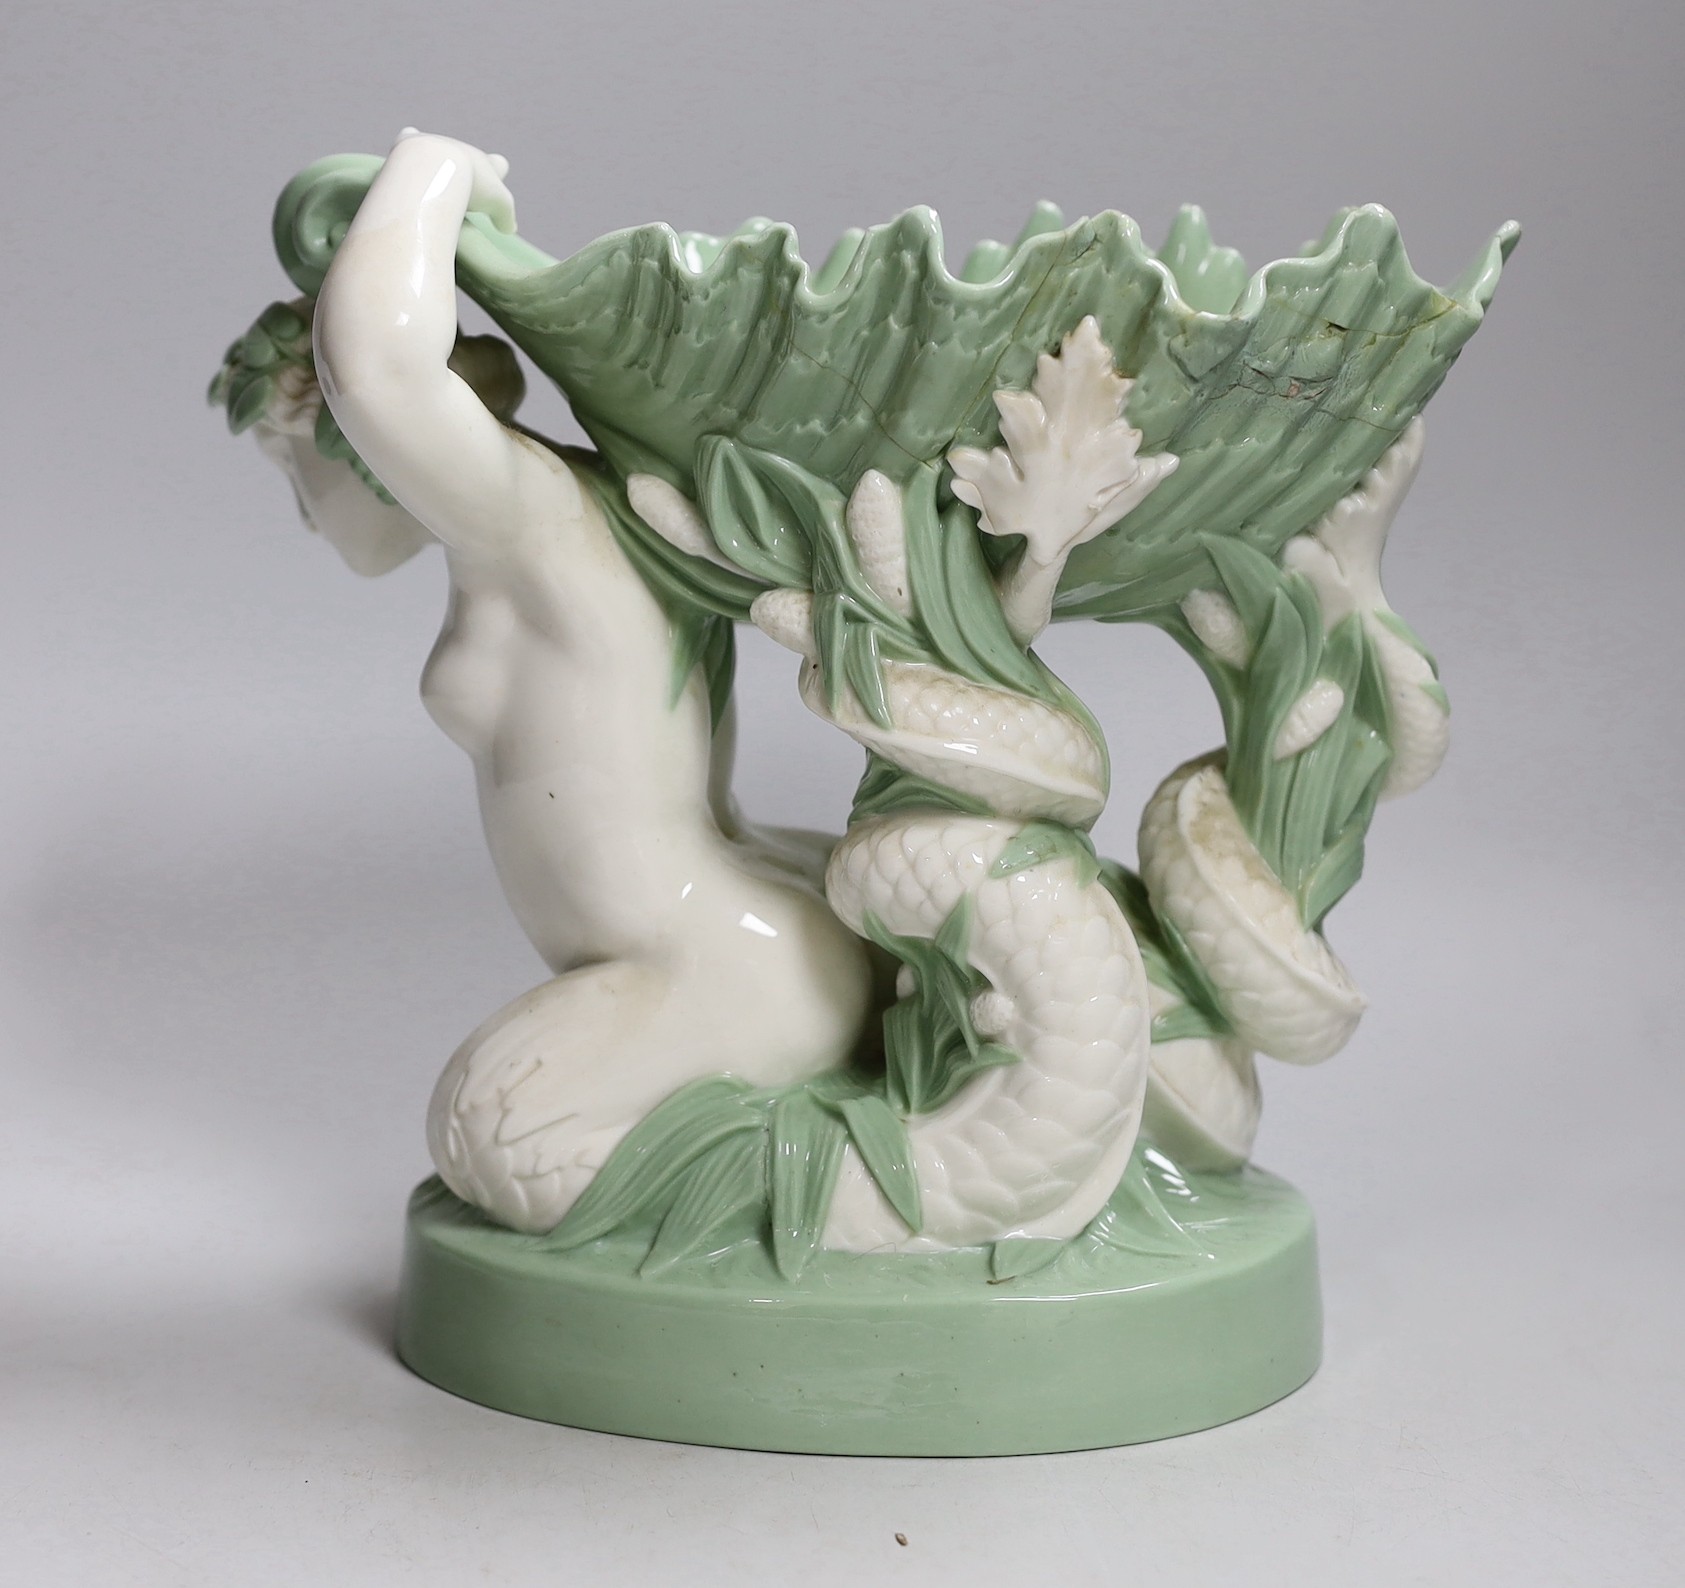 A 19th century Minton celadon glazed figure of a mermaid with a shell on her back, 21cm tall